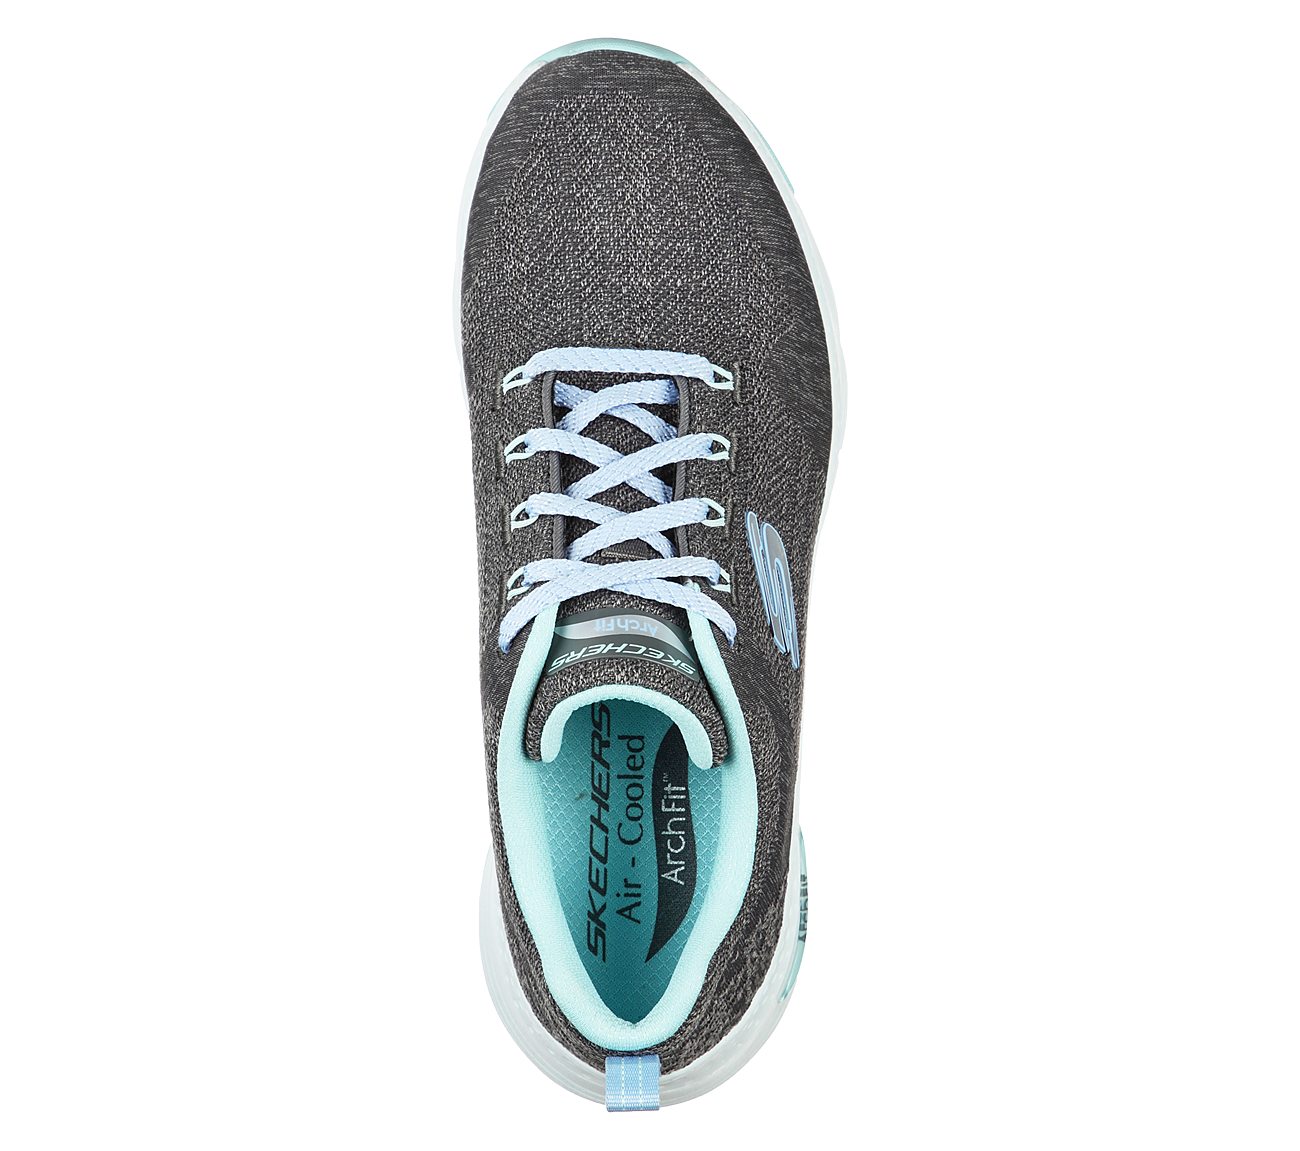 ARCH FIT-COMFY WAVE, CHARCOAL/TURQUOISE Footwear Top View